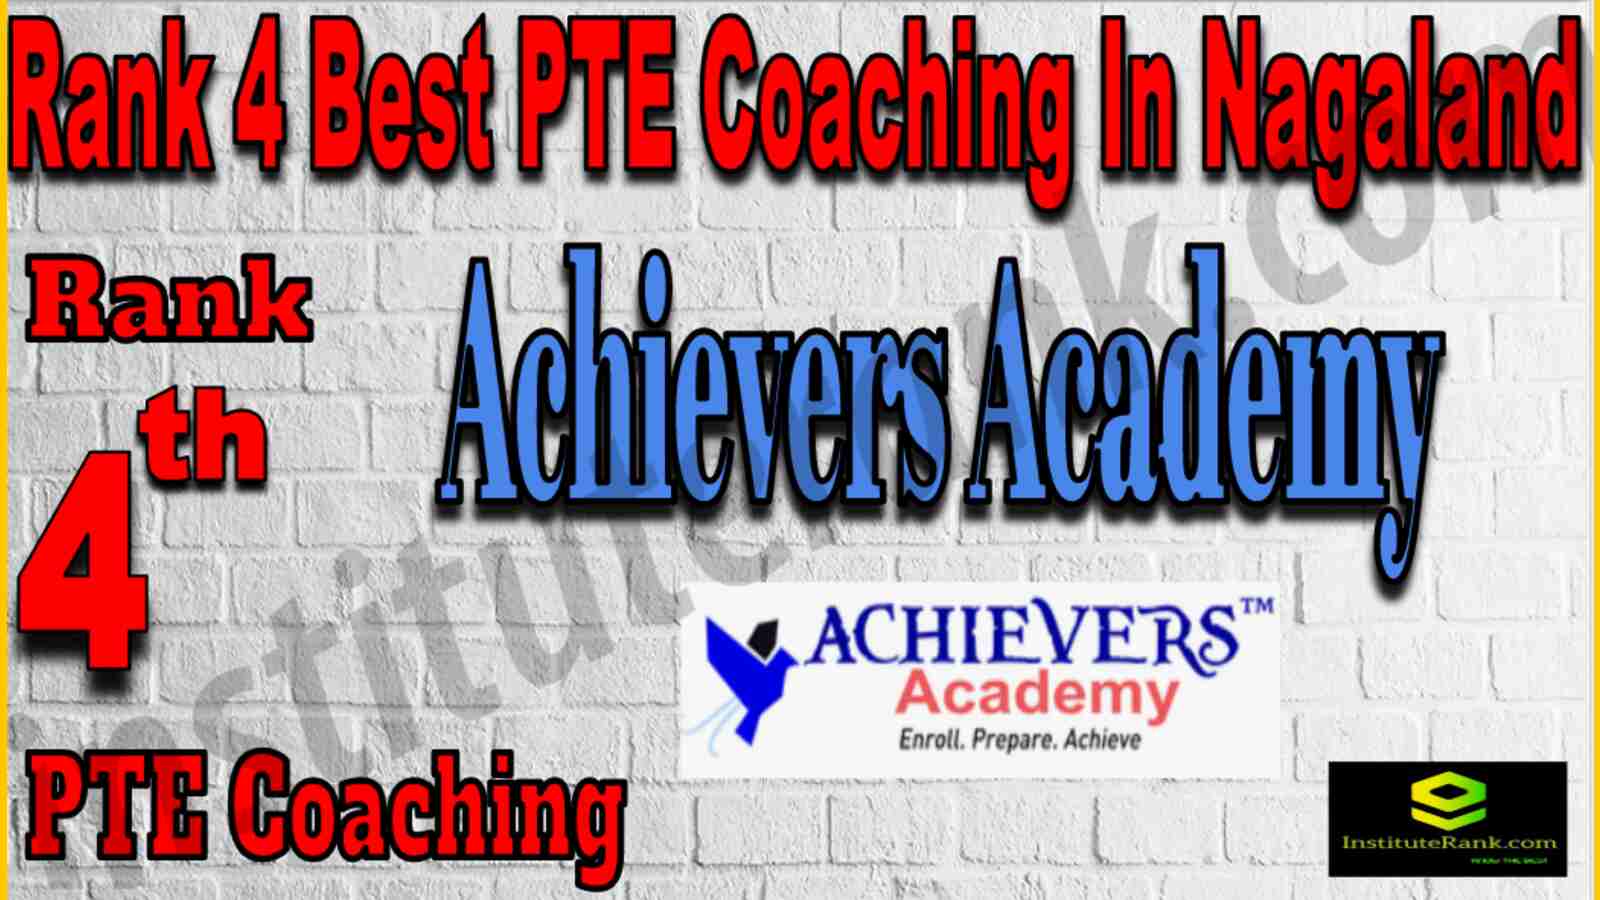 Rank 4 Best PTE Coaching In Nagaland